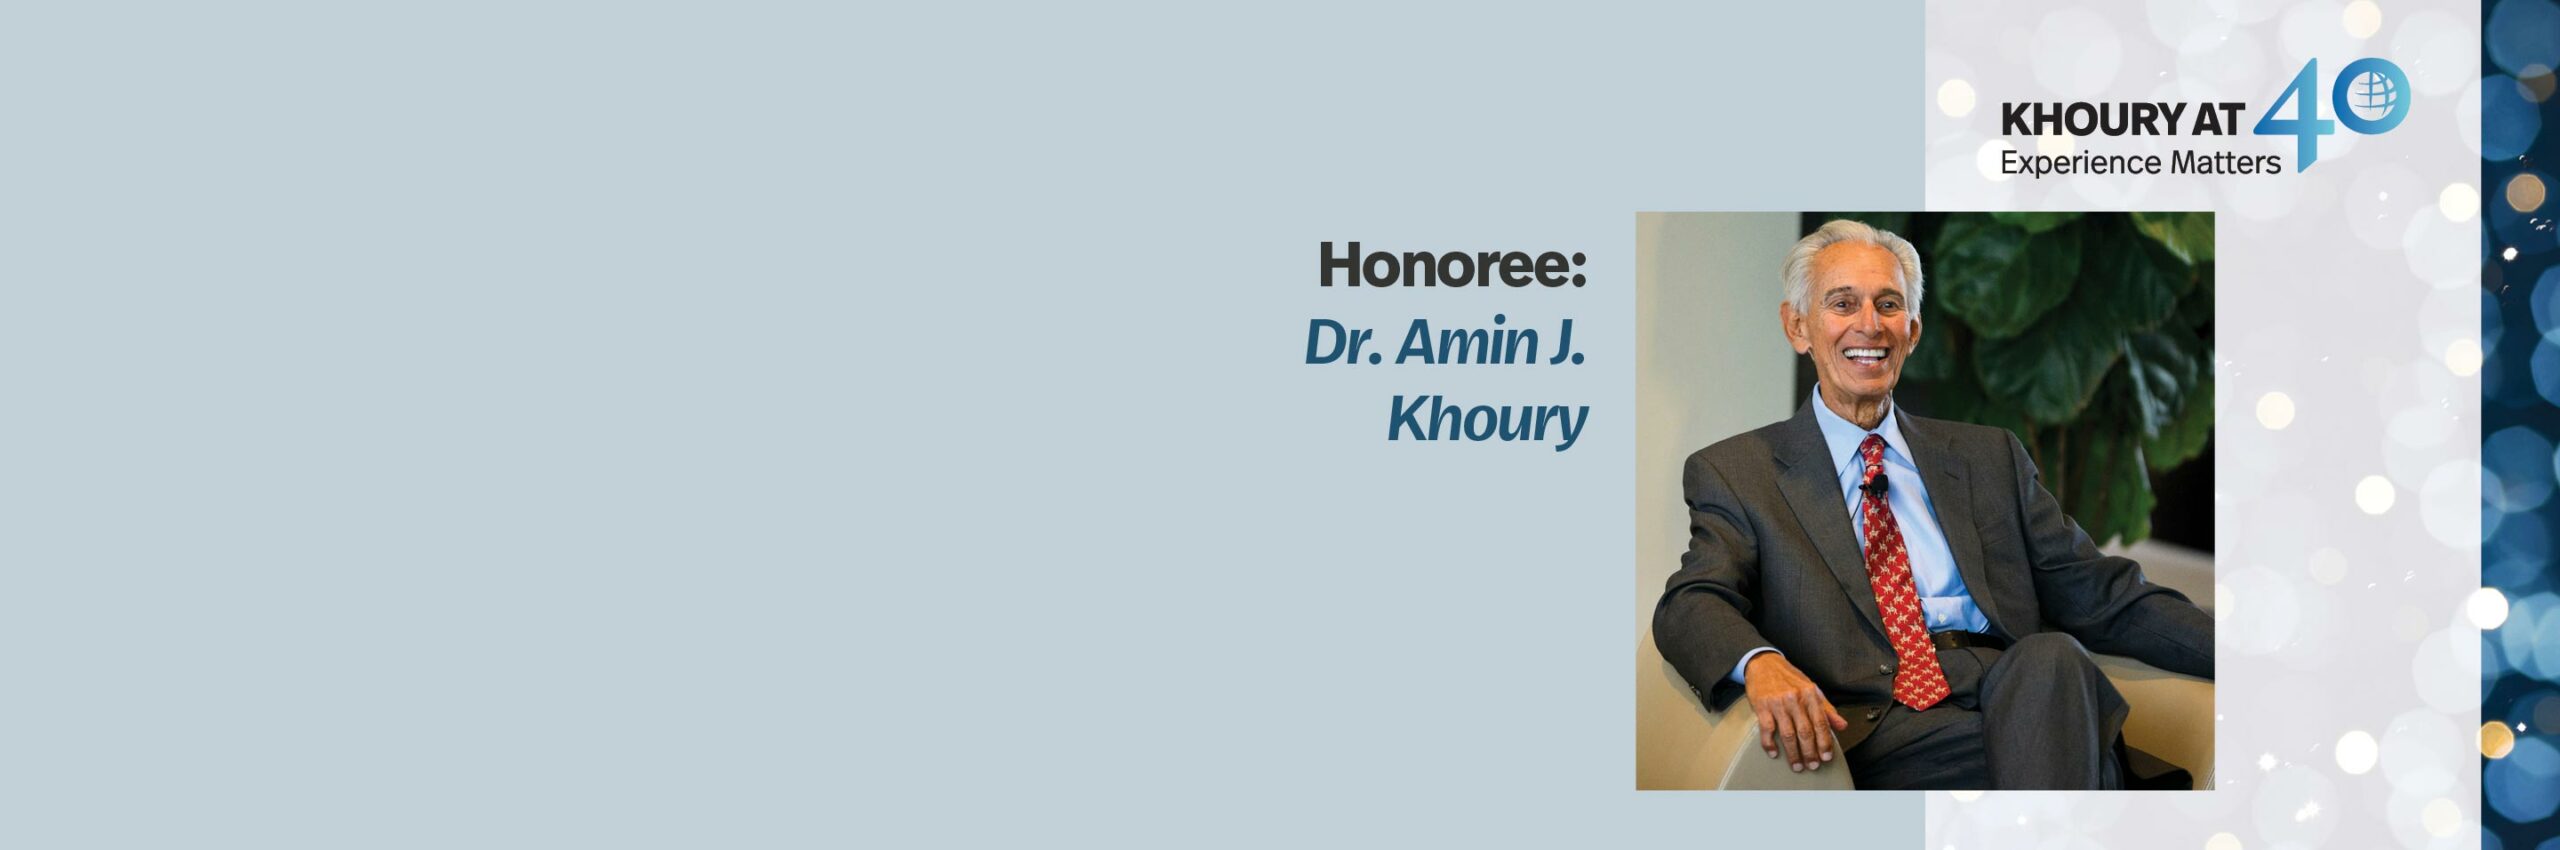 Khoury 40 for 40 Honoree: Dr. Amin J. Khoury